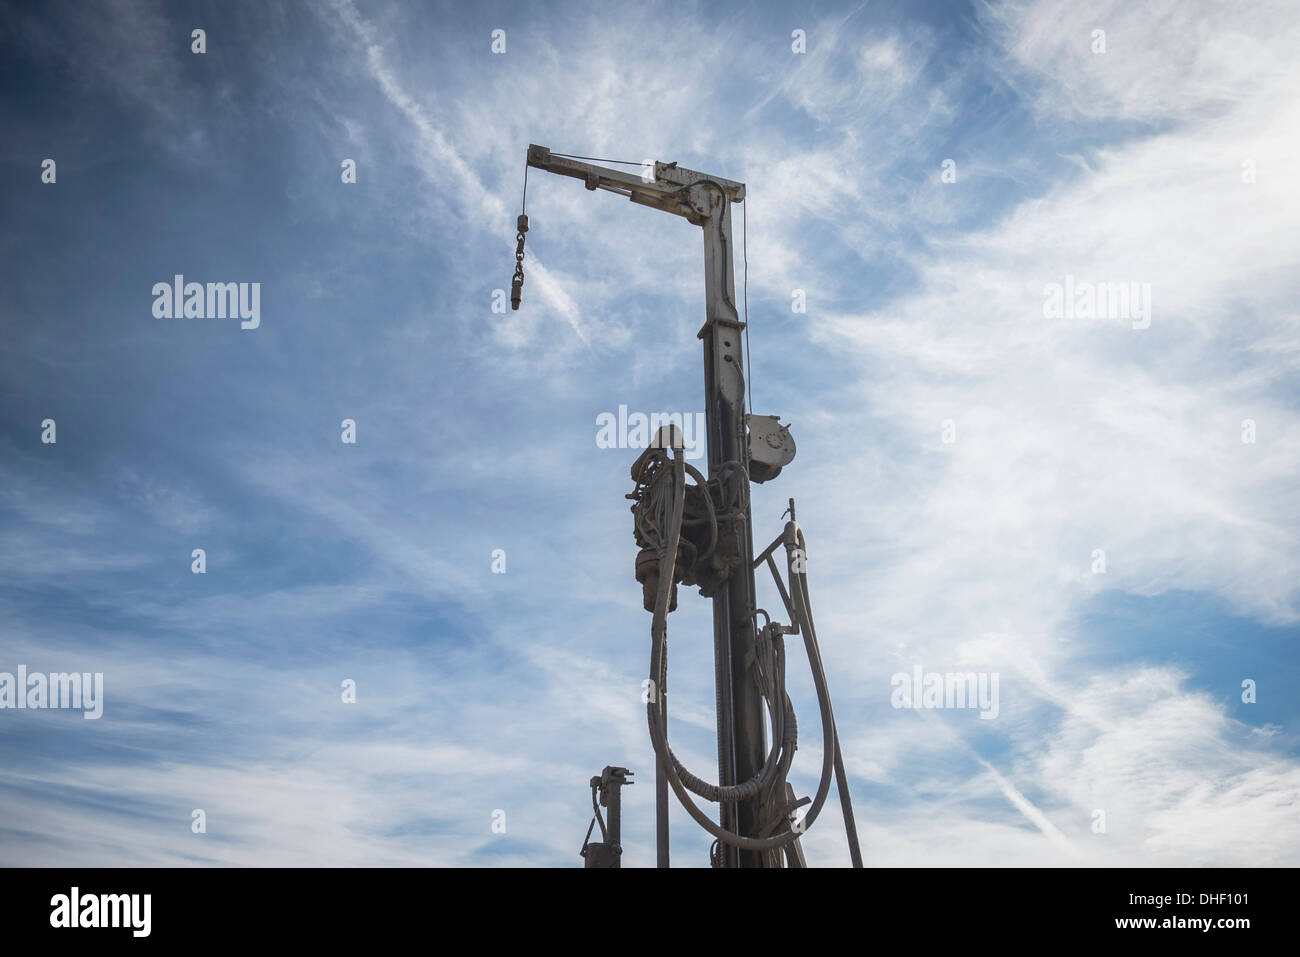 Low angle view of drilling rig against blue sky Stock Photo